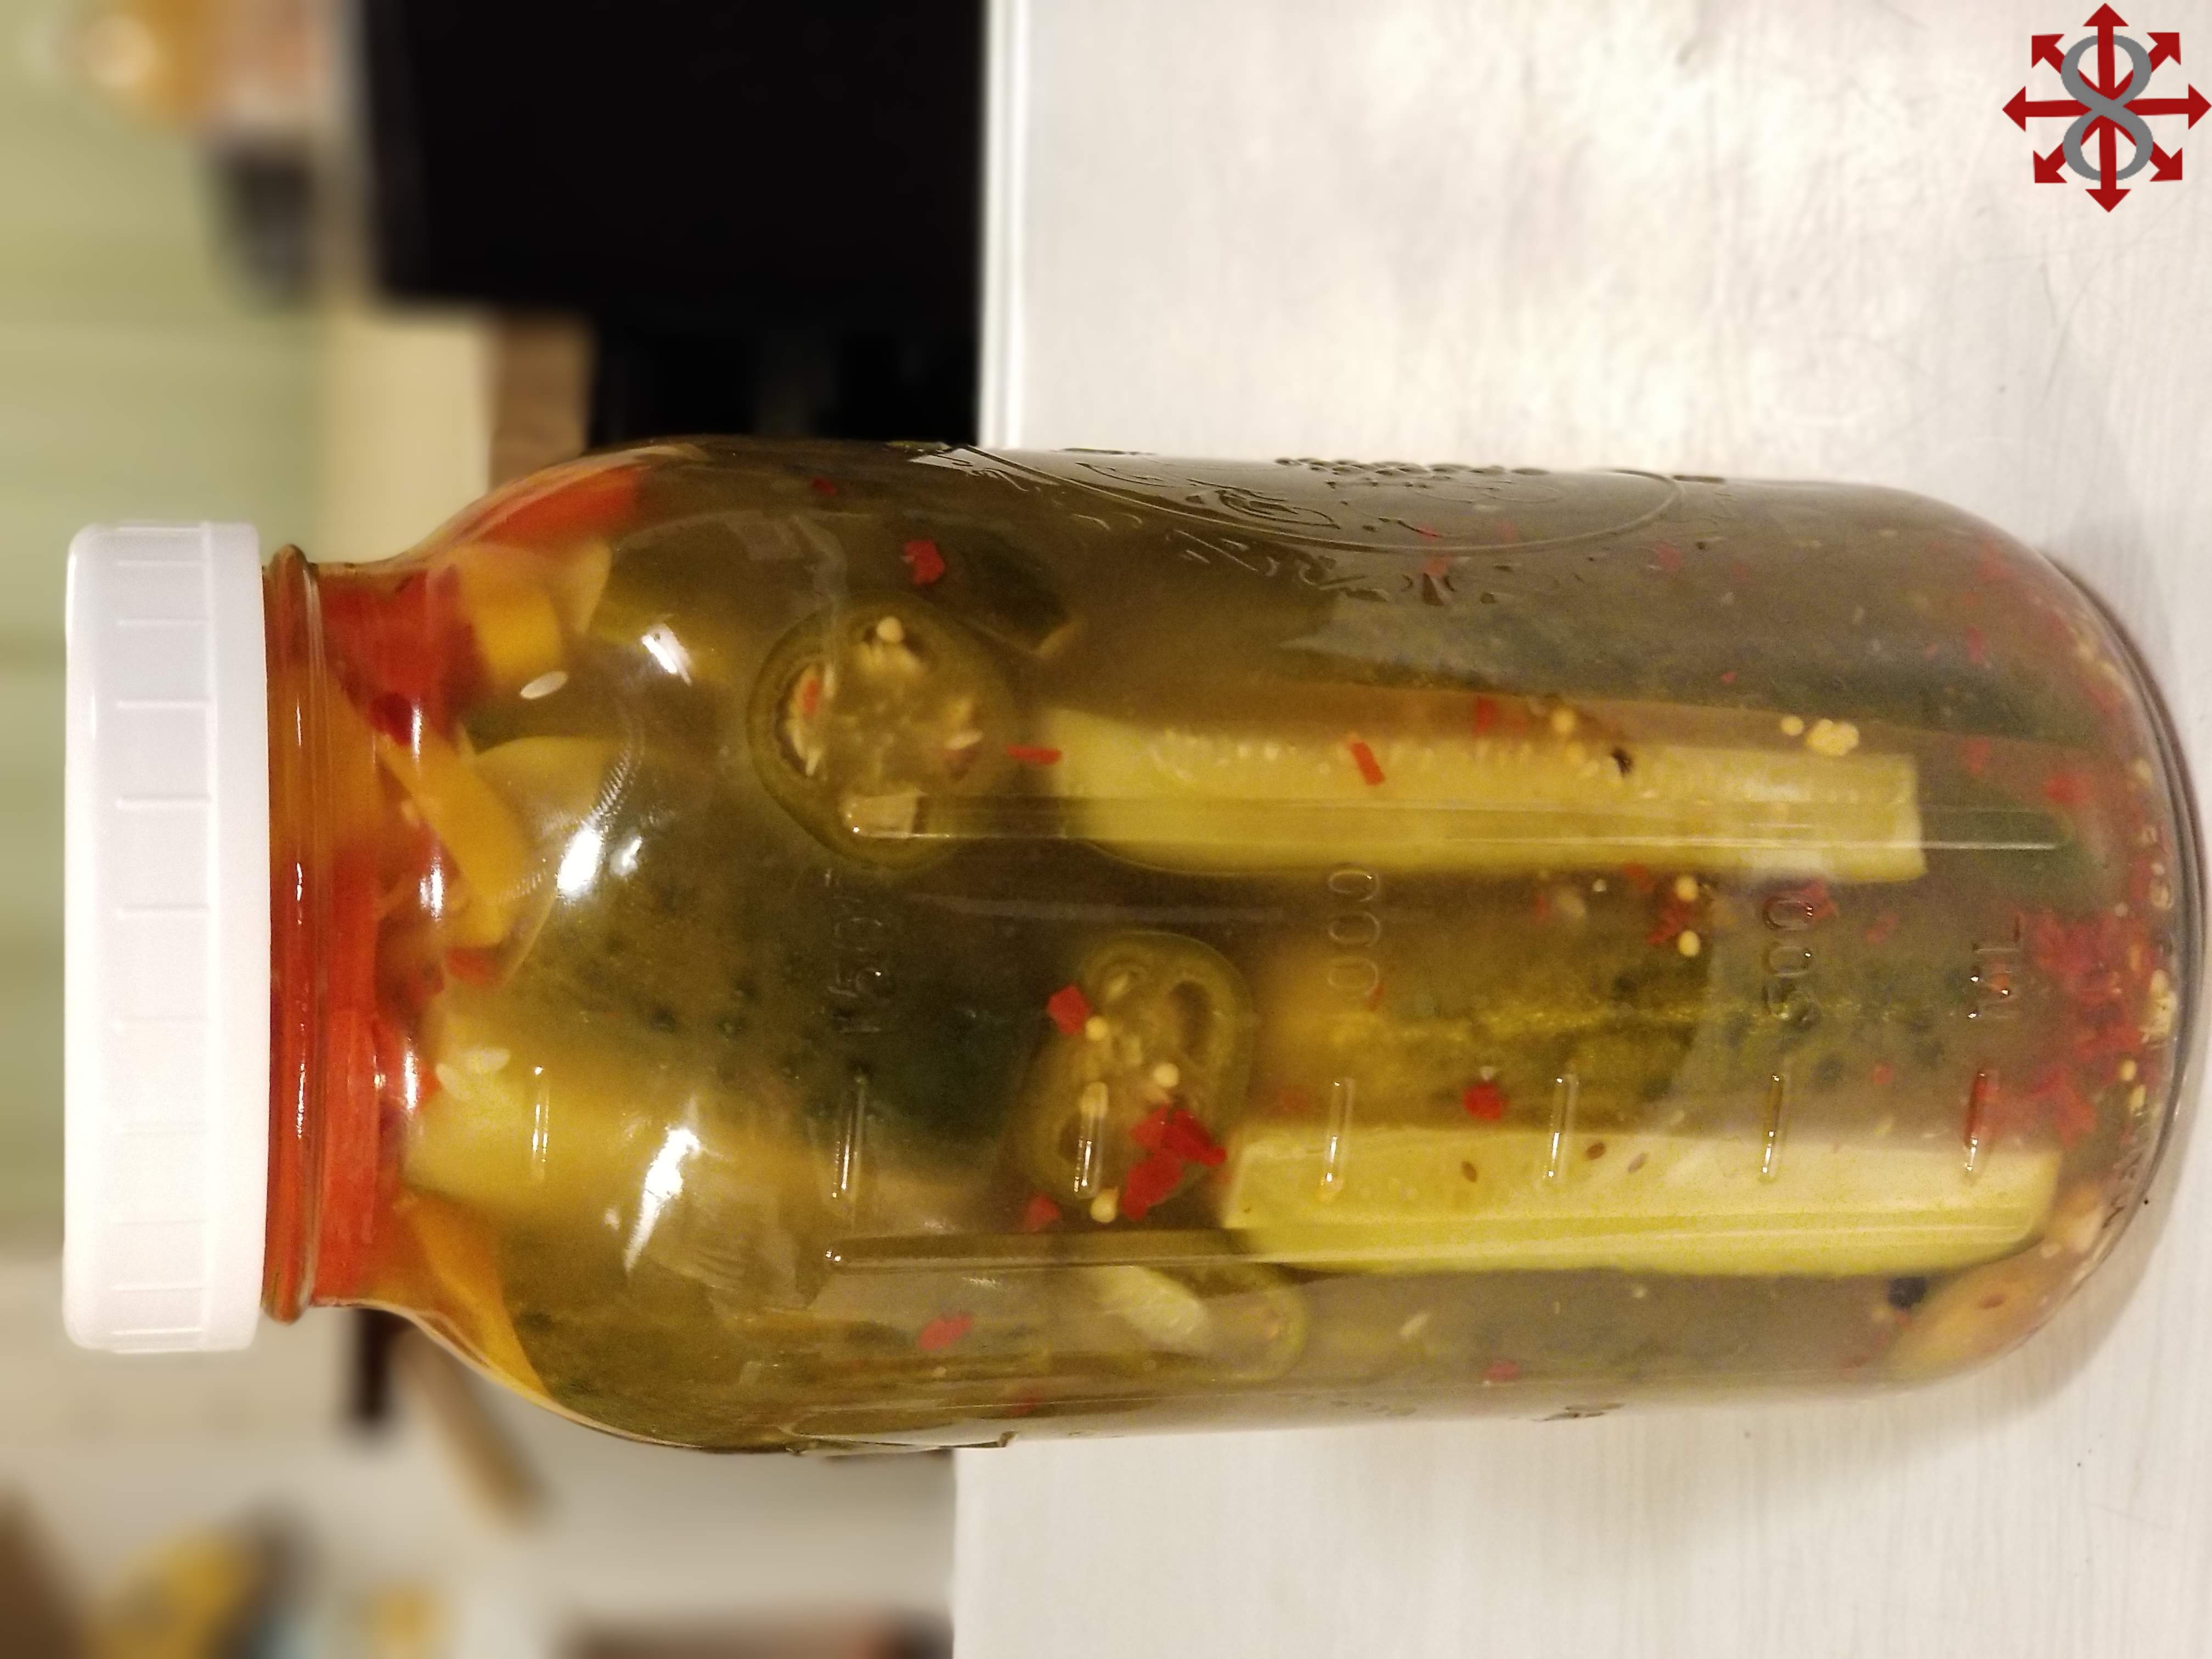 1/2 Gallon of spicy dill pickles ready for the refrigerator